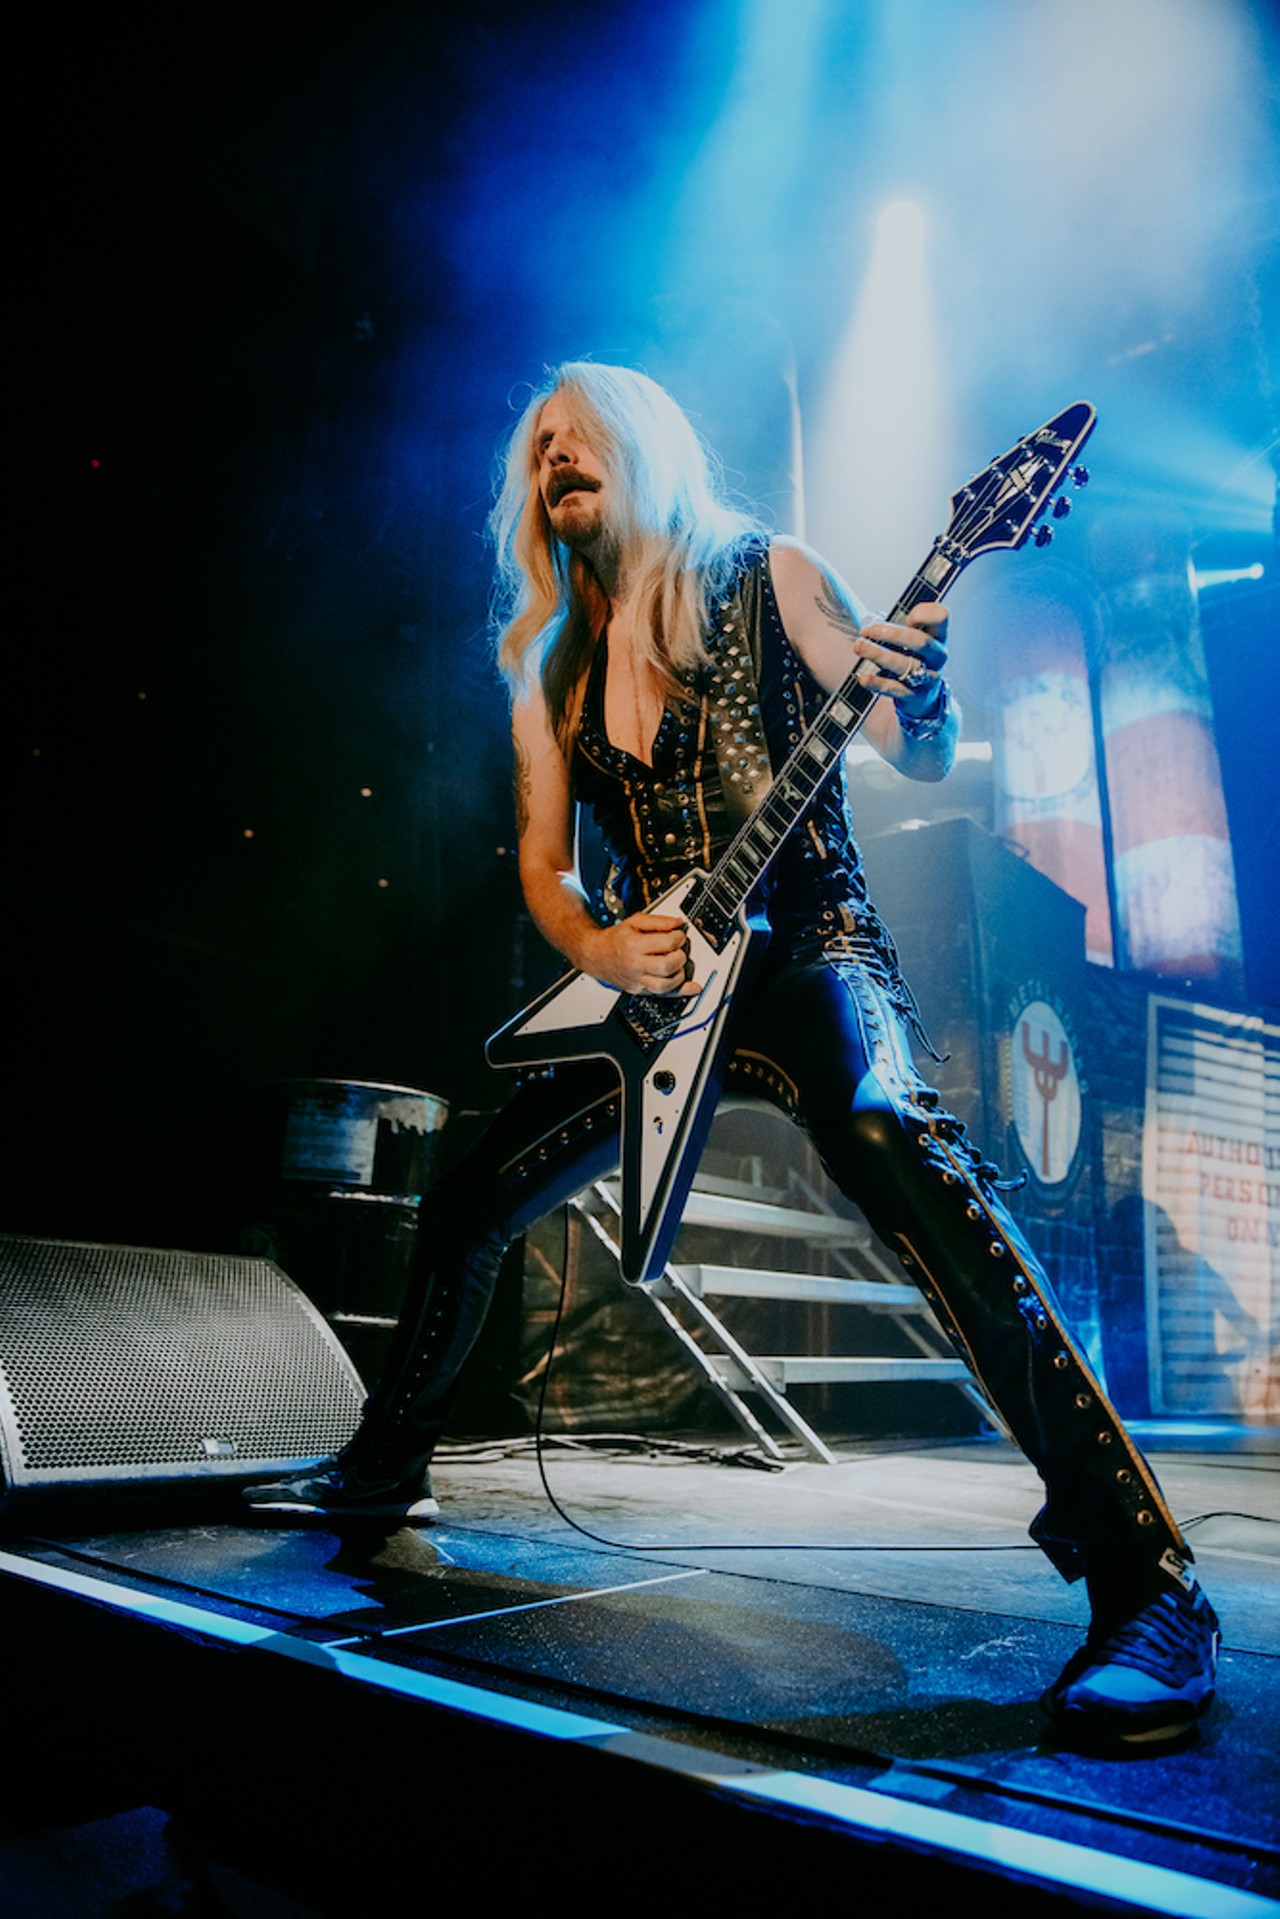 Everything we saw as Judas Priest unleashed its firepower at San Antonio's Tech Port Center